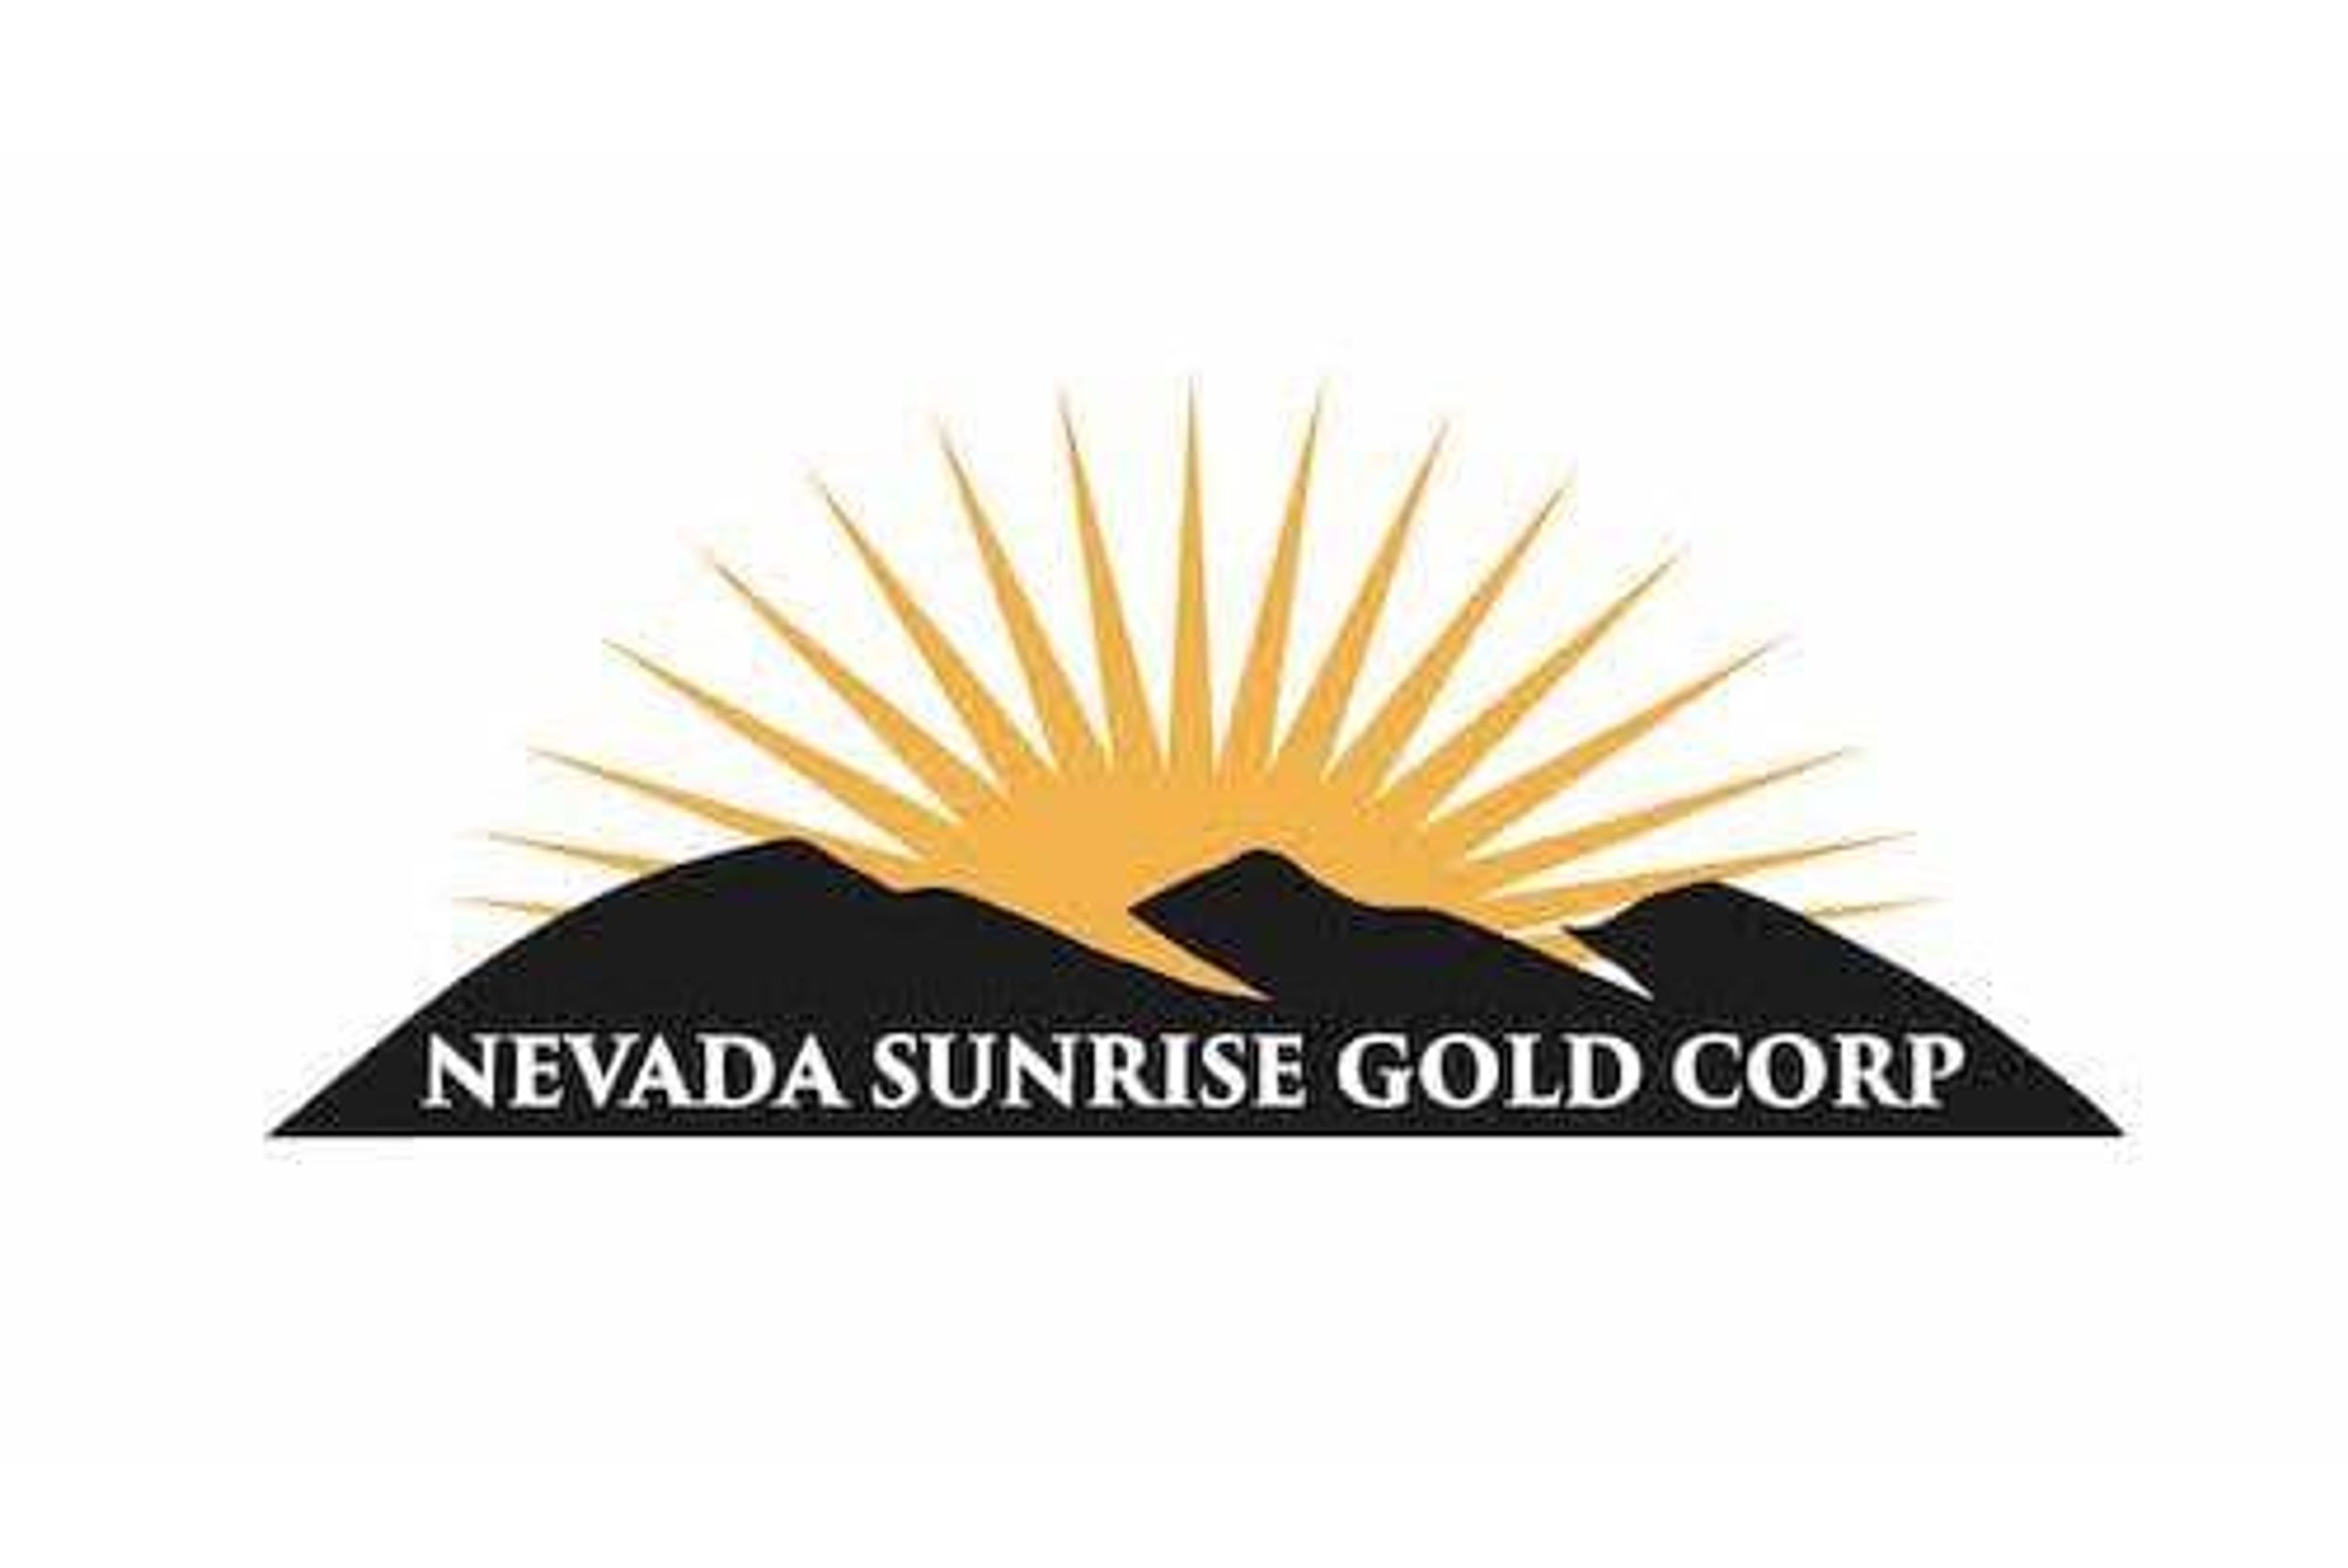 Nevada Sunrise Begins Geophysical Survey Over New Lithium Discovery at the Gemini Lithium Project, Nevada